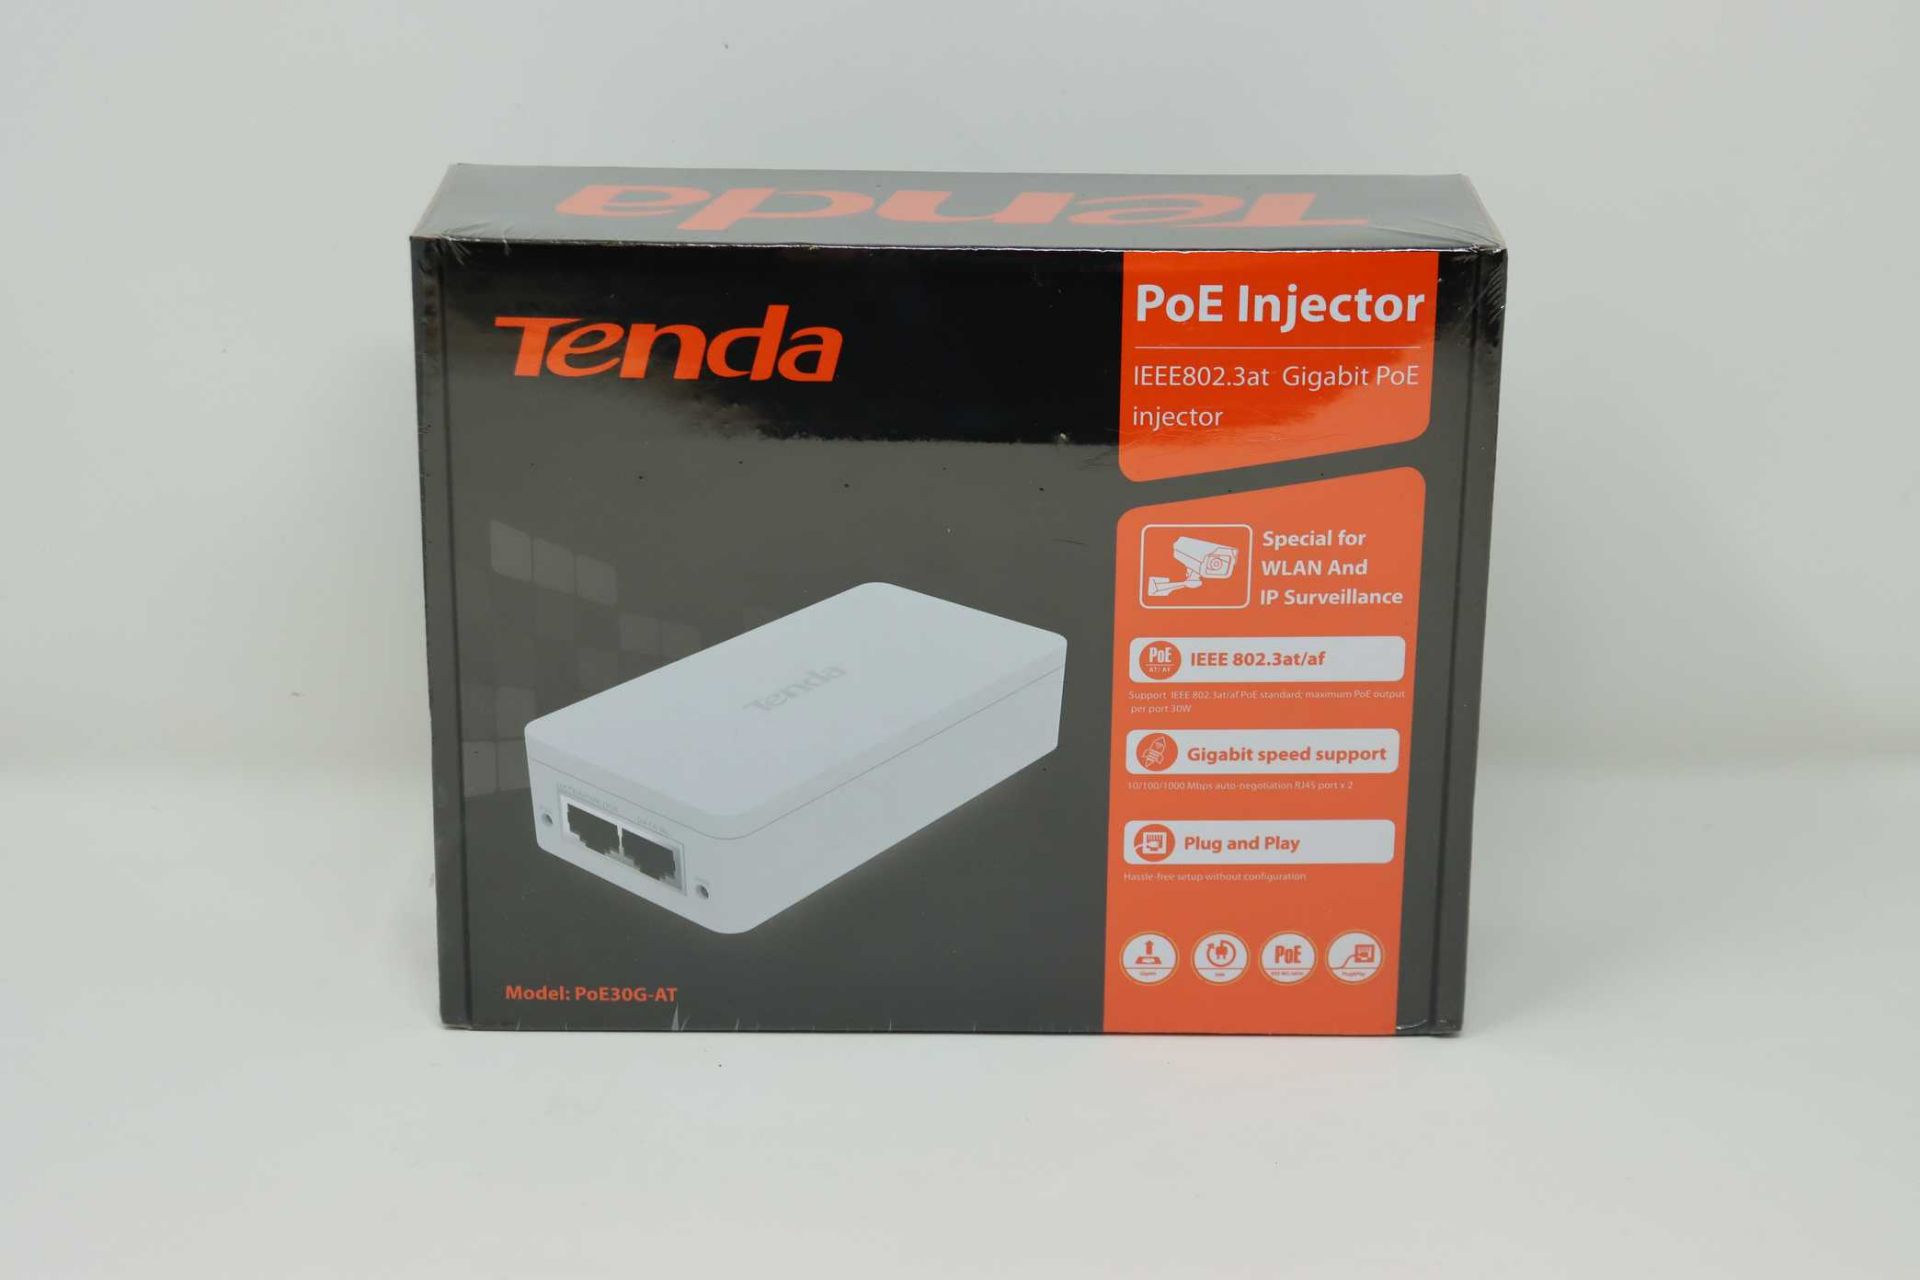 A boxed as new Tenda IEEE802.3at PoE Injector (Model: PoE30G-AT) (Box sealed).